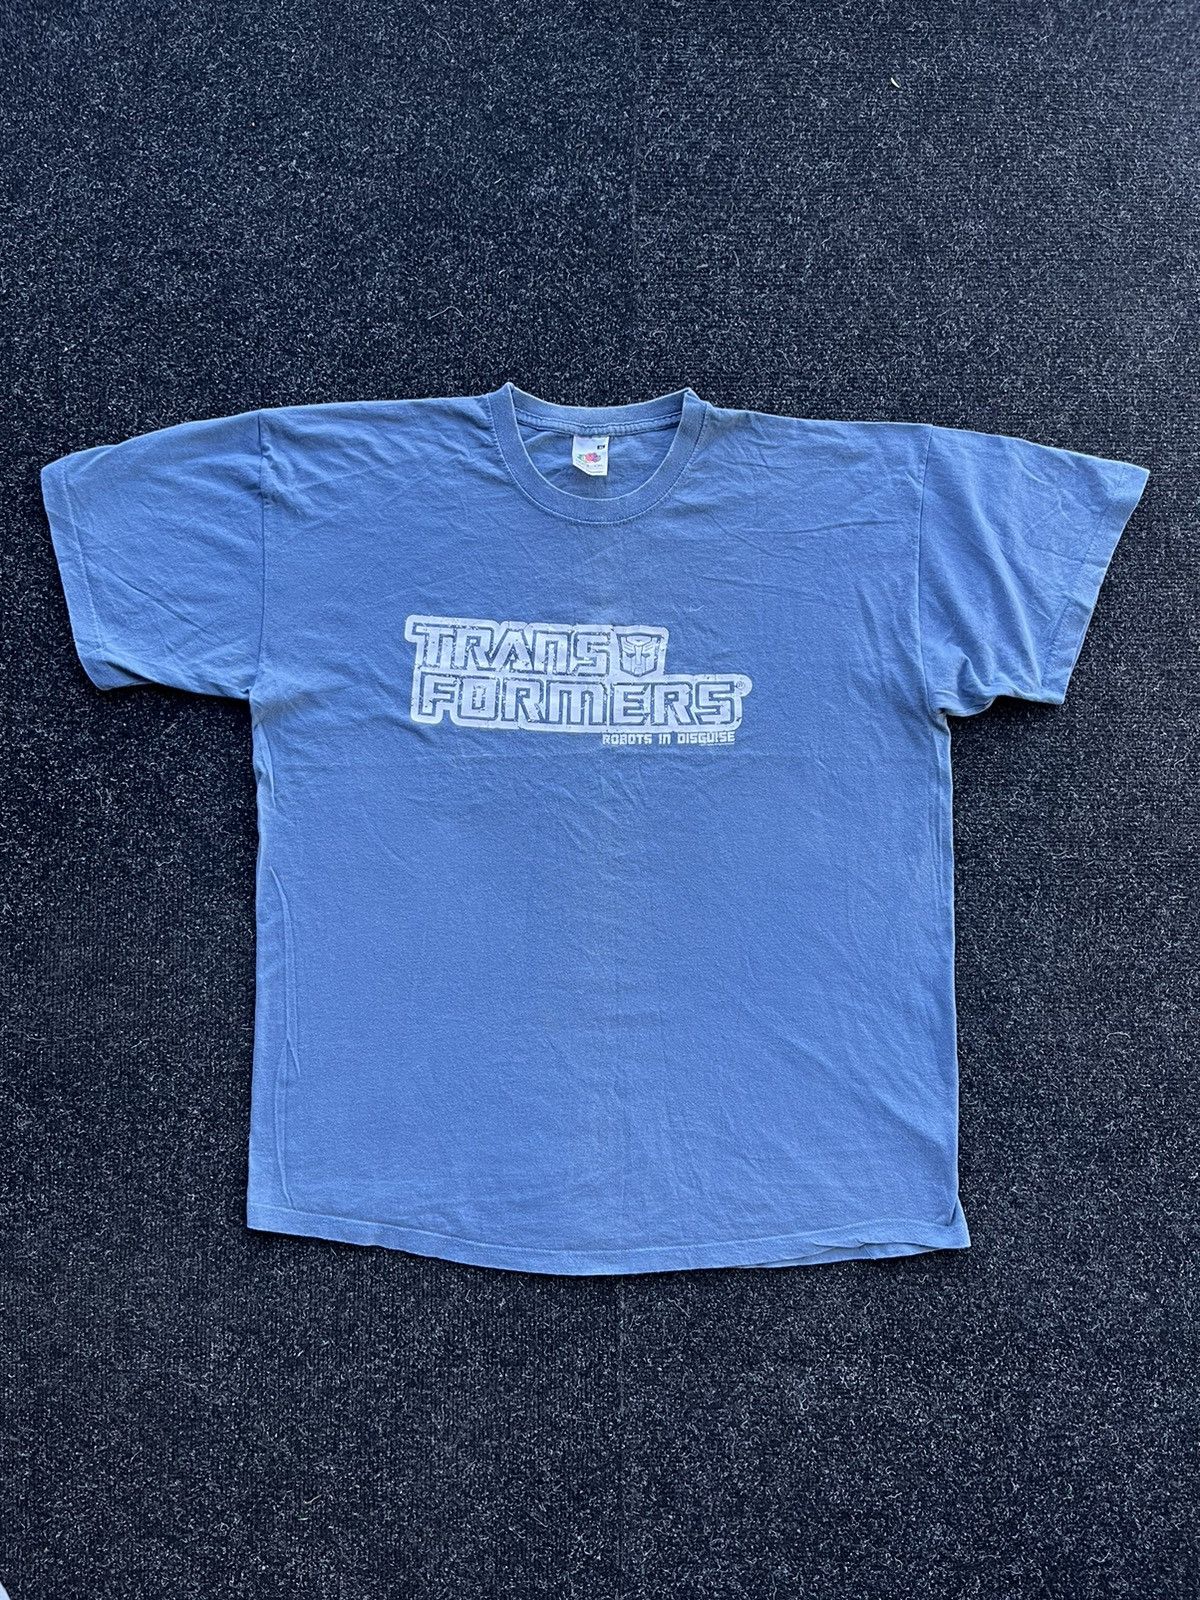 Pre-owned Movie X Vintage 2007 Transformers Robots In Disguise Promo Movie Tee In Blue